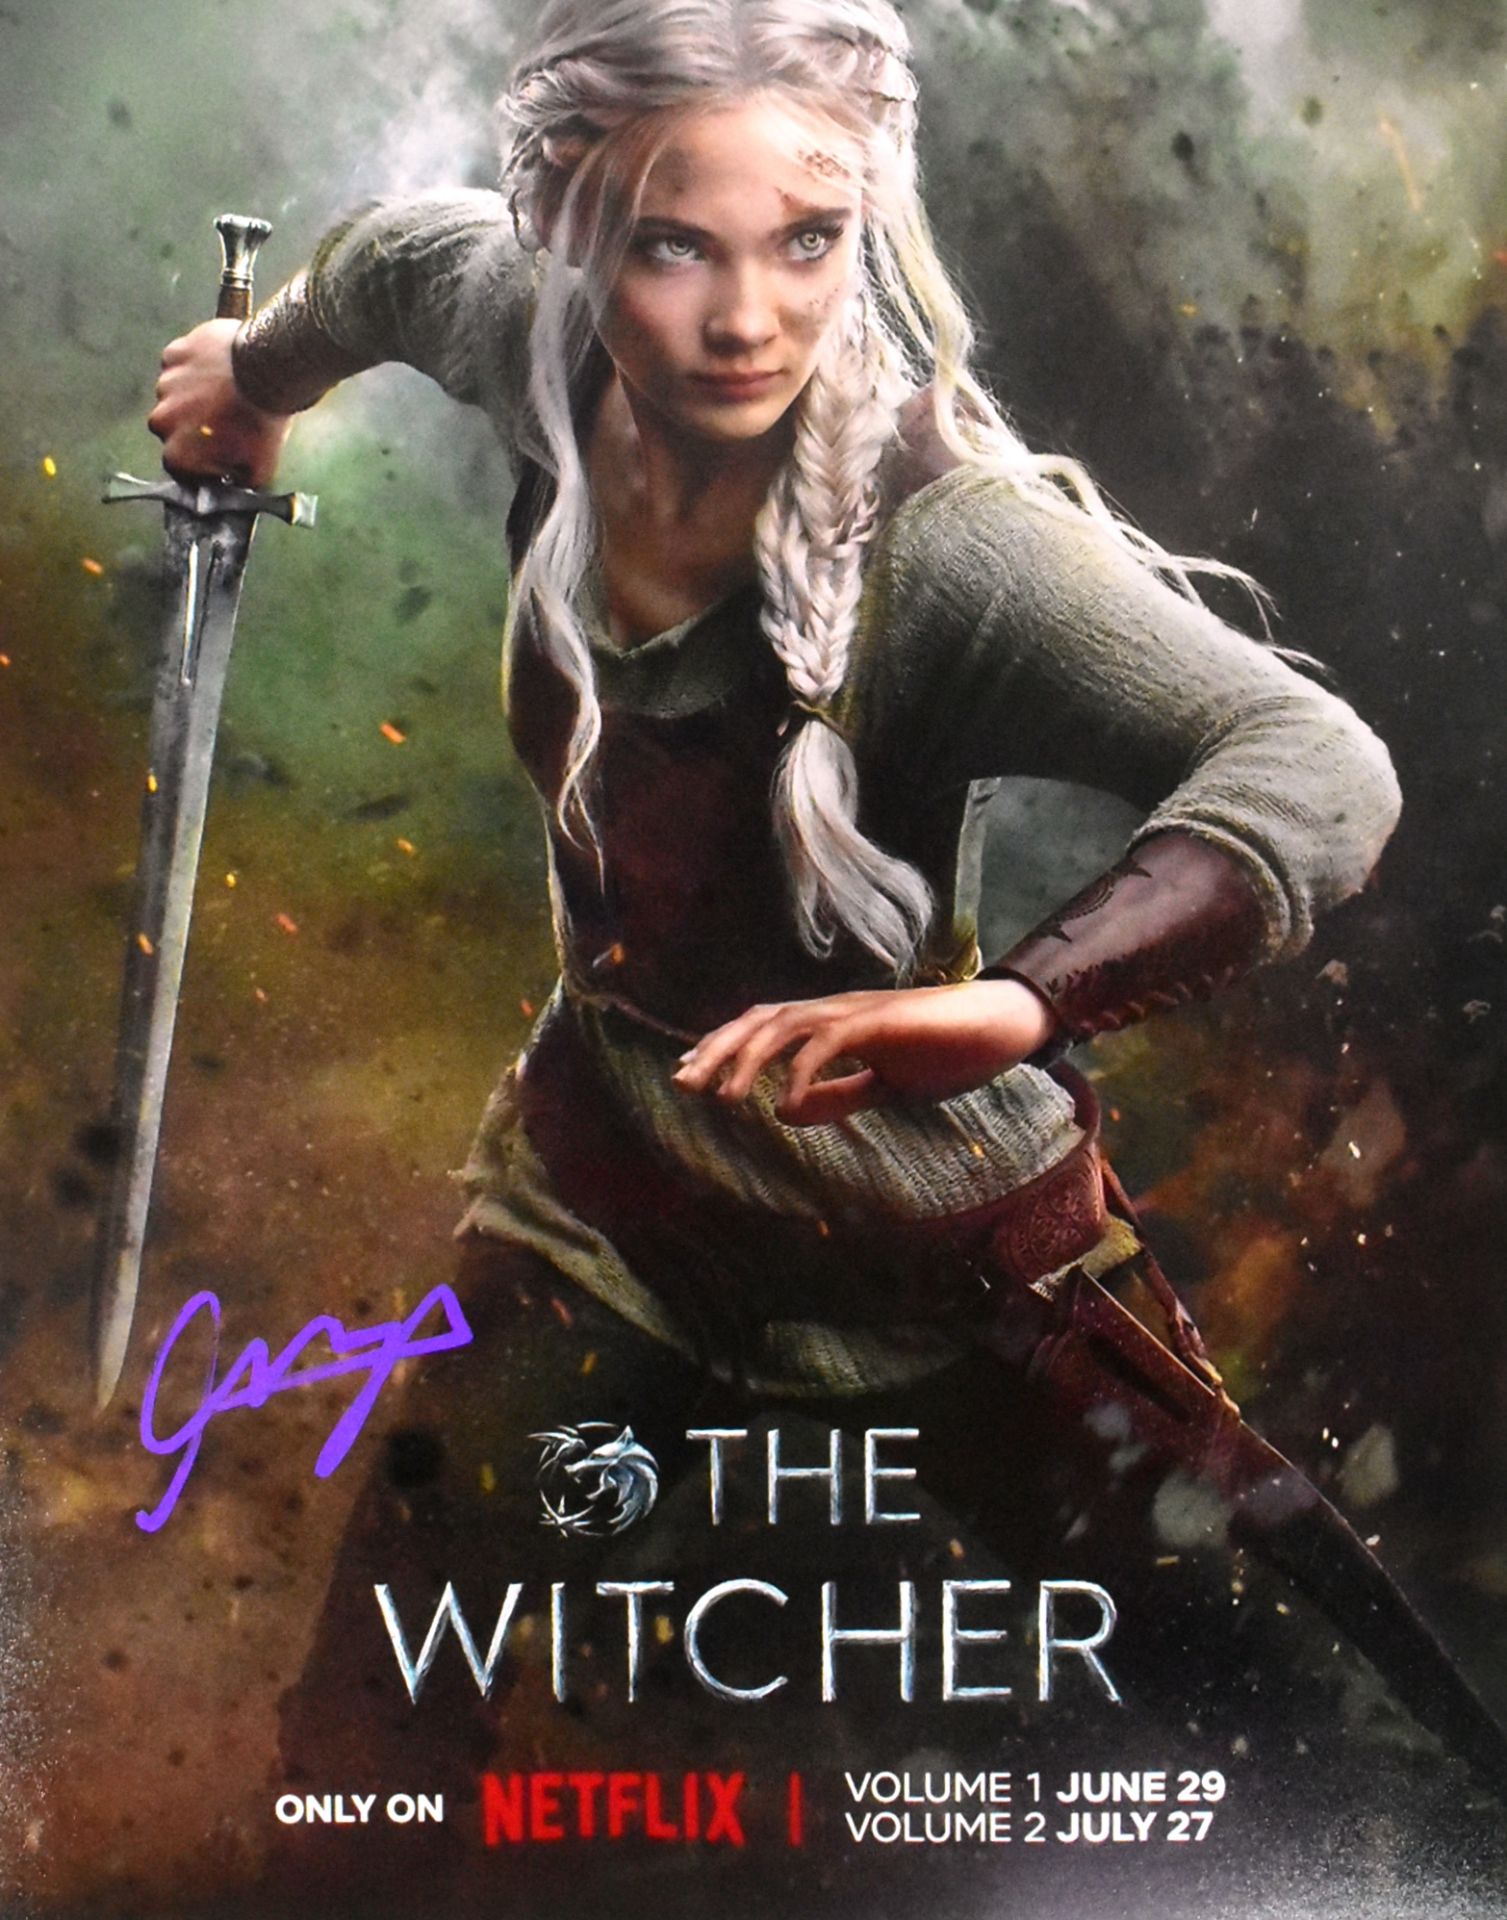 FREYA ALLAN - THE WITCHER - SIGNED 8X10" PHOTO - AFTAL